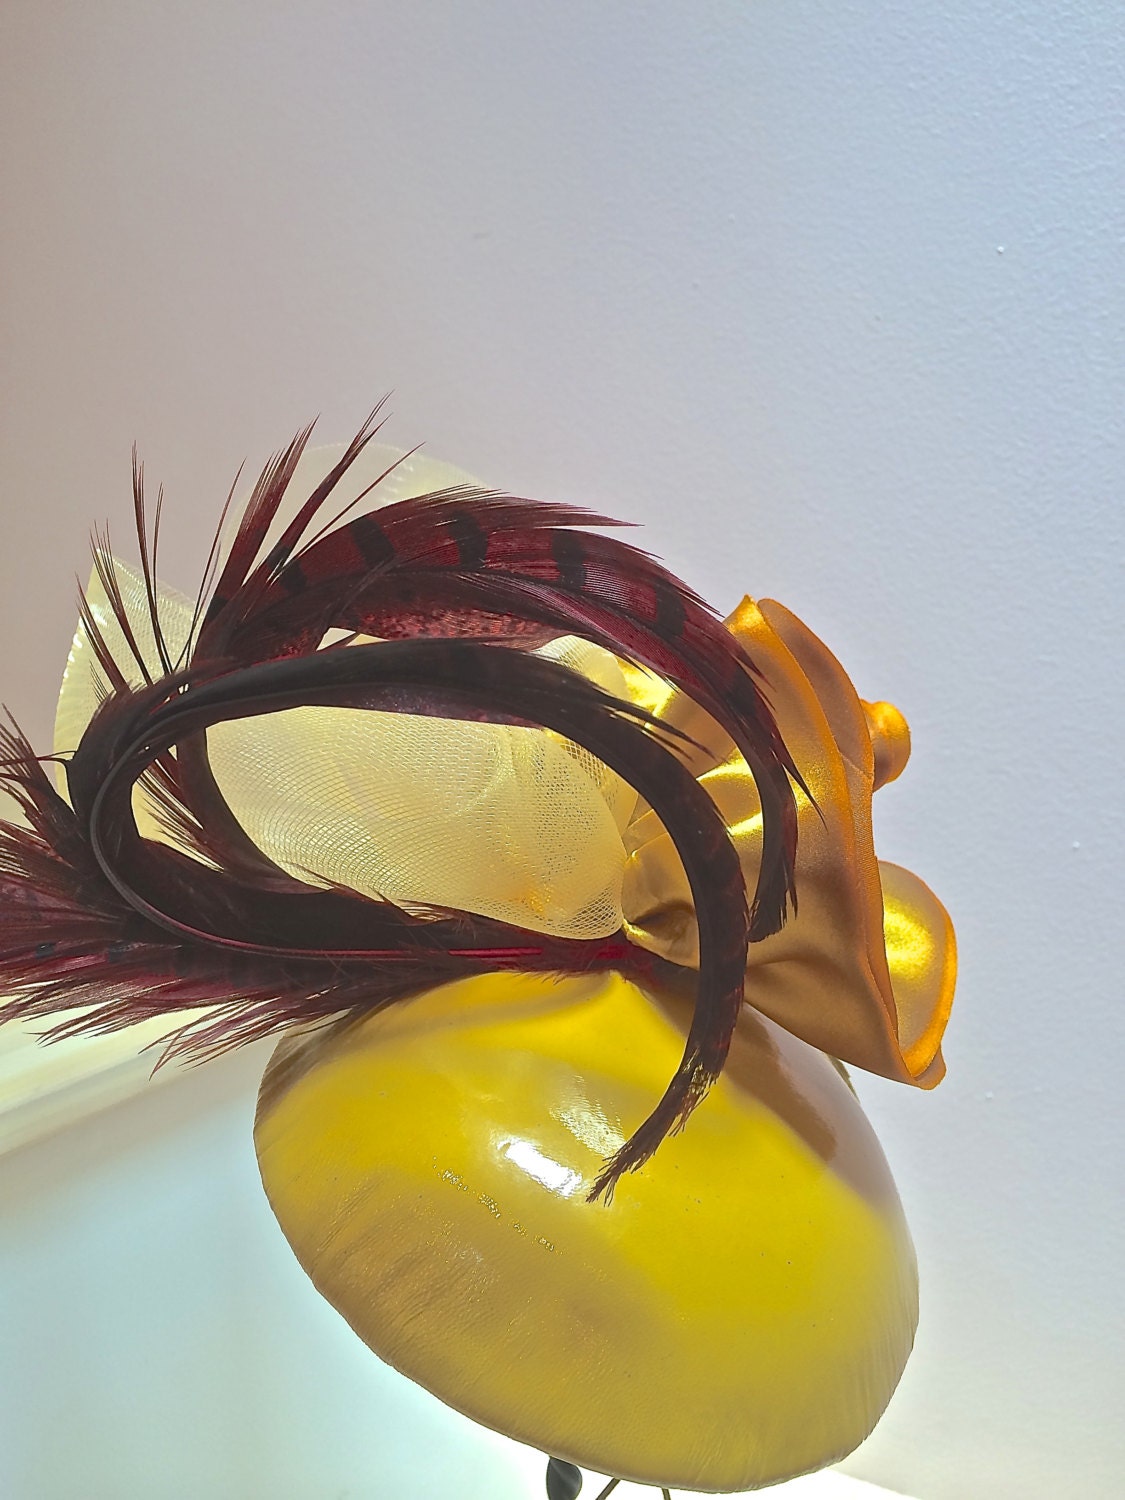 Yellow Patent Leather Fascinator, Headpiece with Yellow Silk ribbon and Red feathers, Summer Party Hat! Wedding hat or Cocktail Evening Hat.